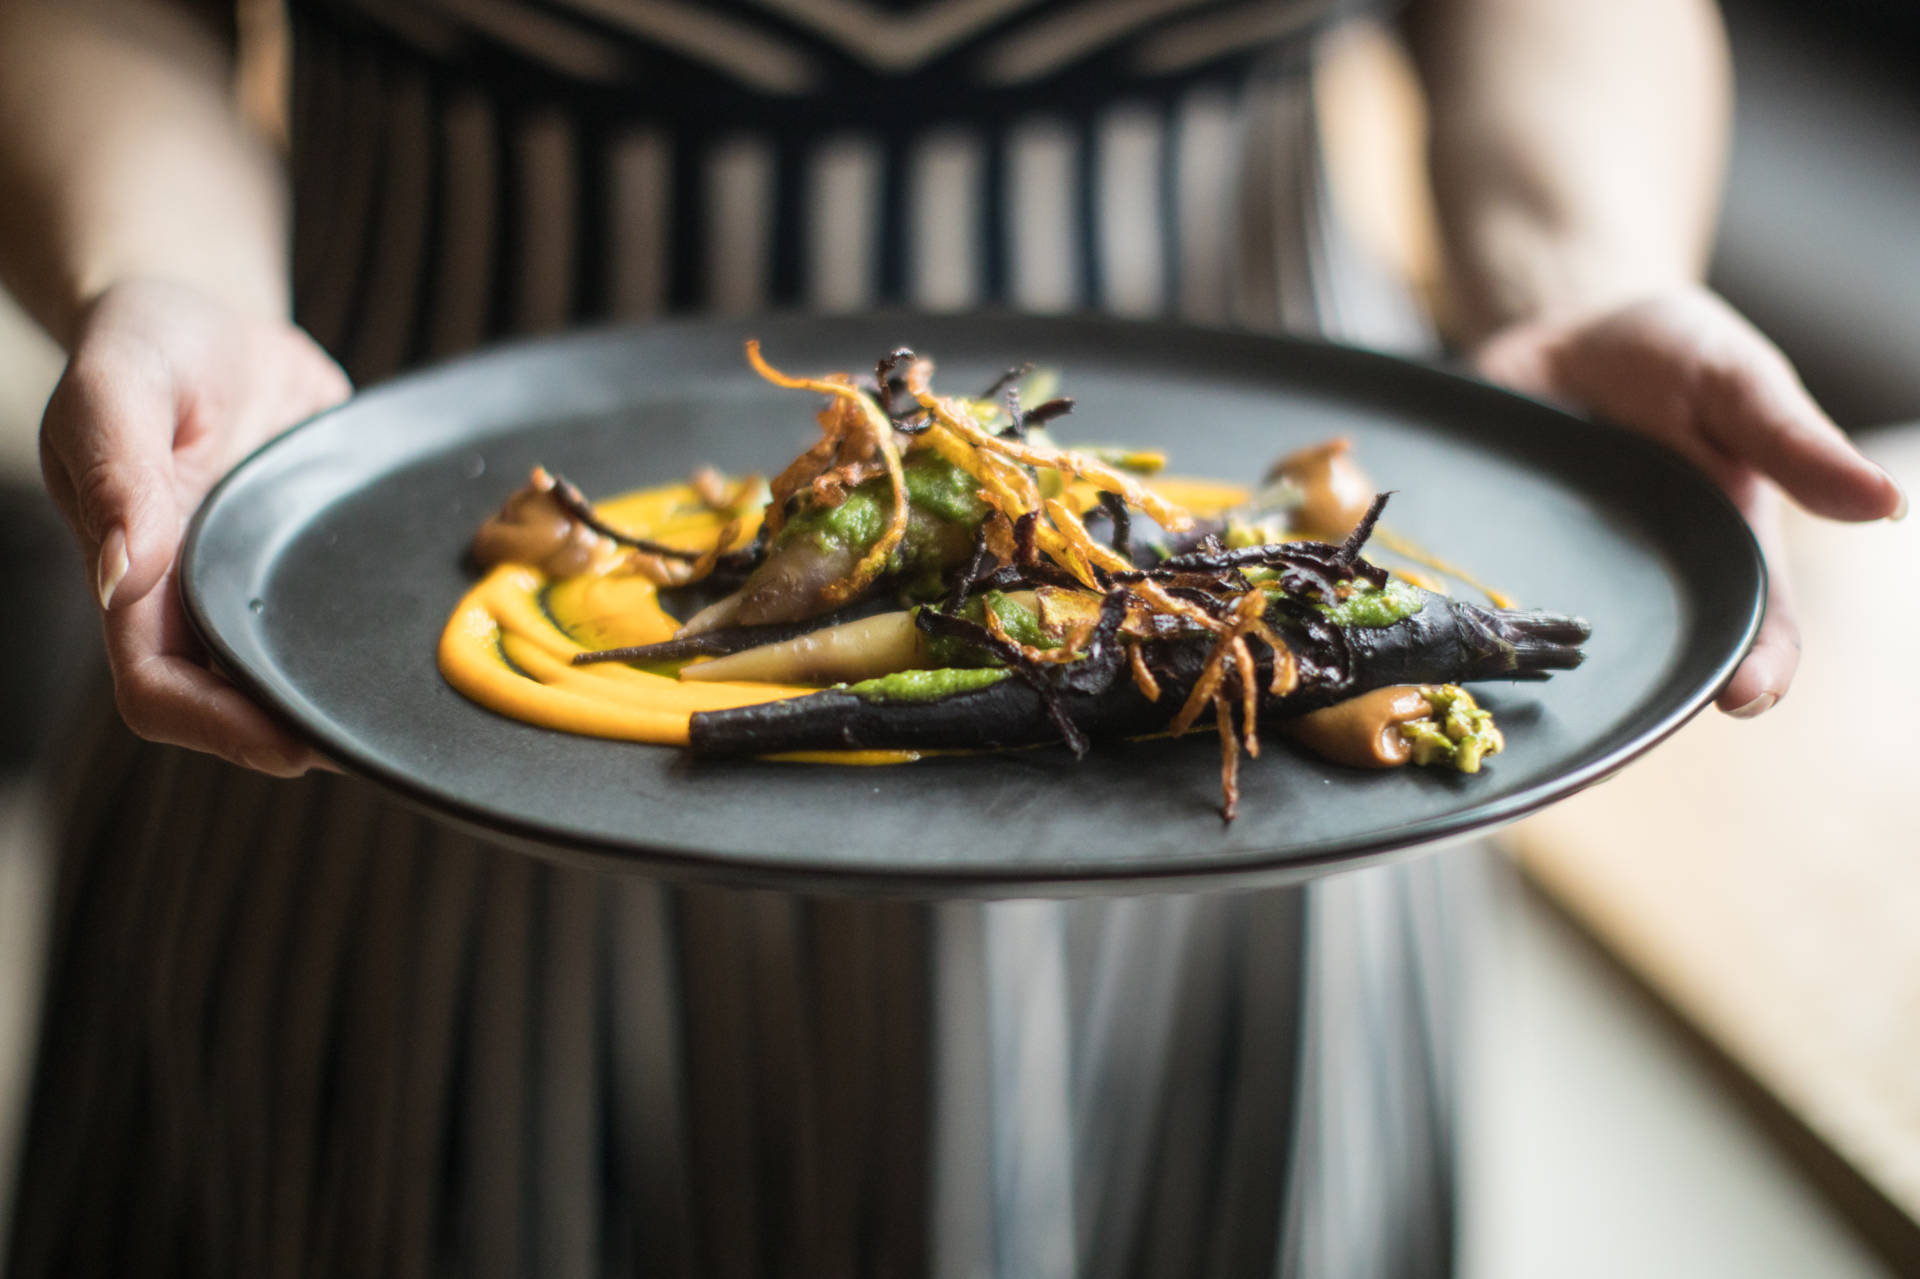 "This dish is every form of carrot you can use," Ma says. It features blanched, sauteed heirloom carrots topped with fried, crunchy strips of carrot skin with a side of pesto made with pureed carrots and the green carrot tops that are usually discarded.